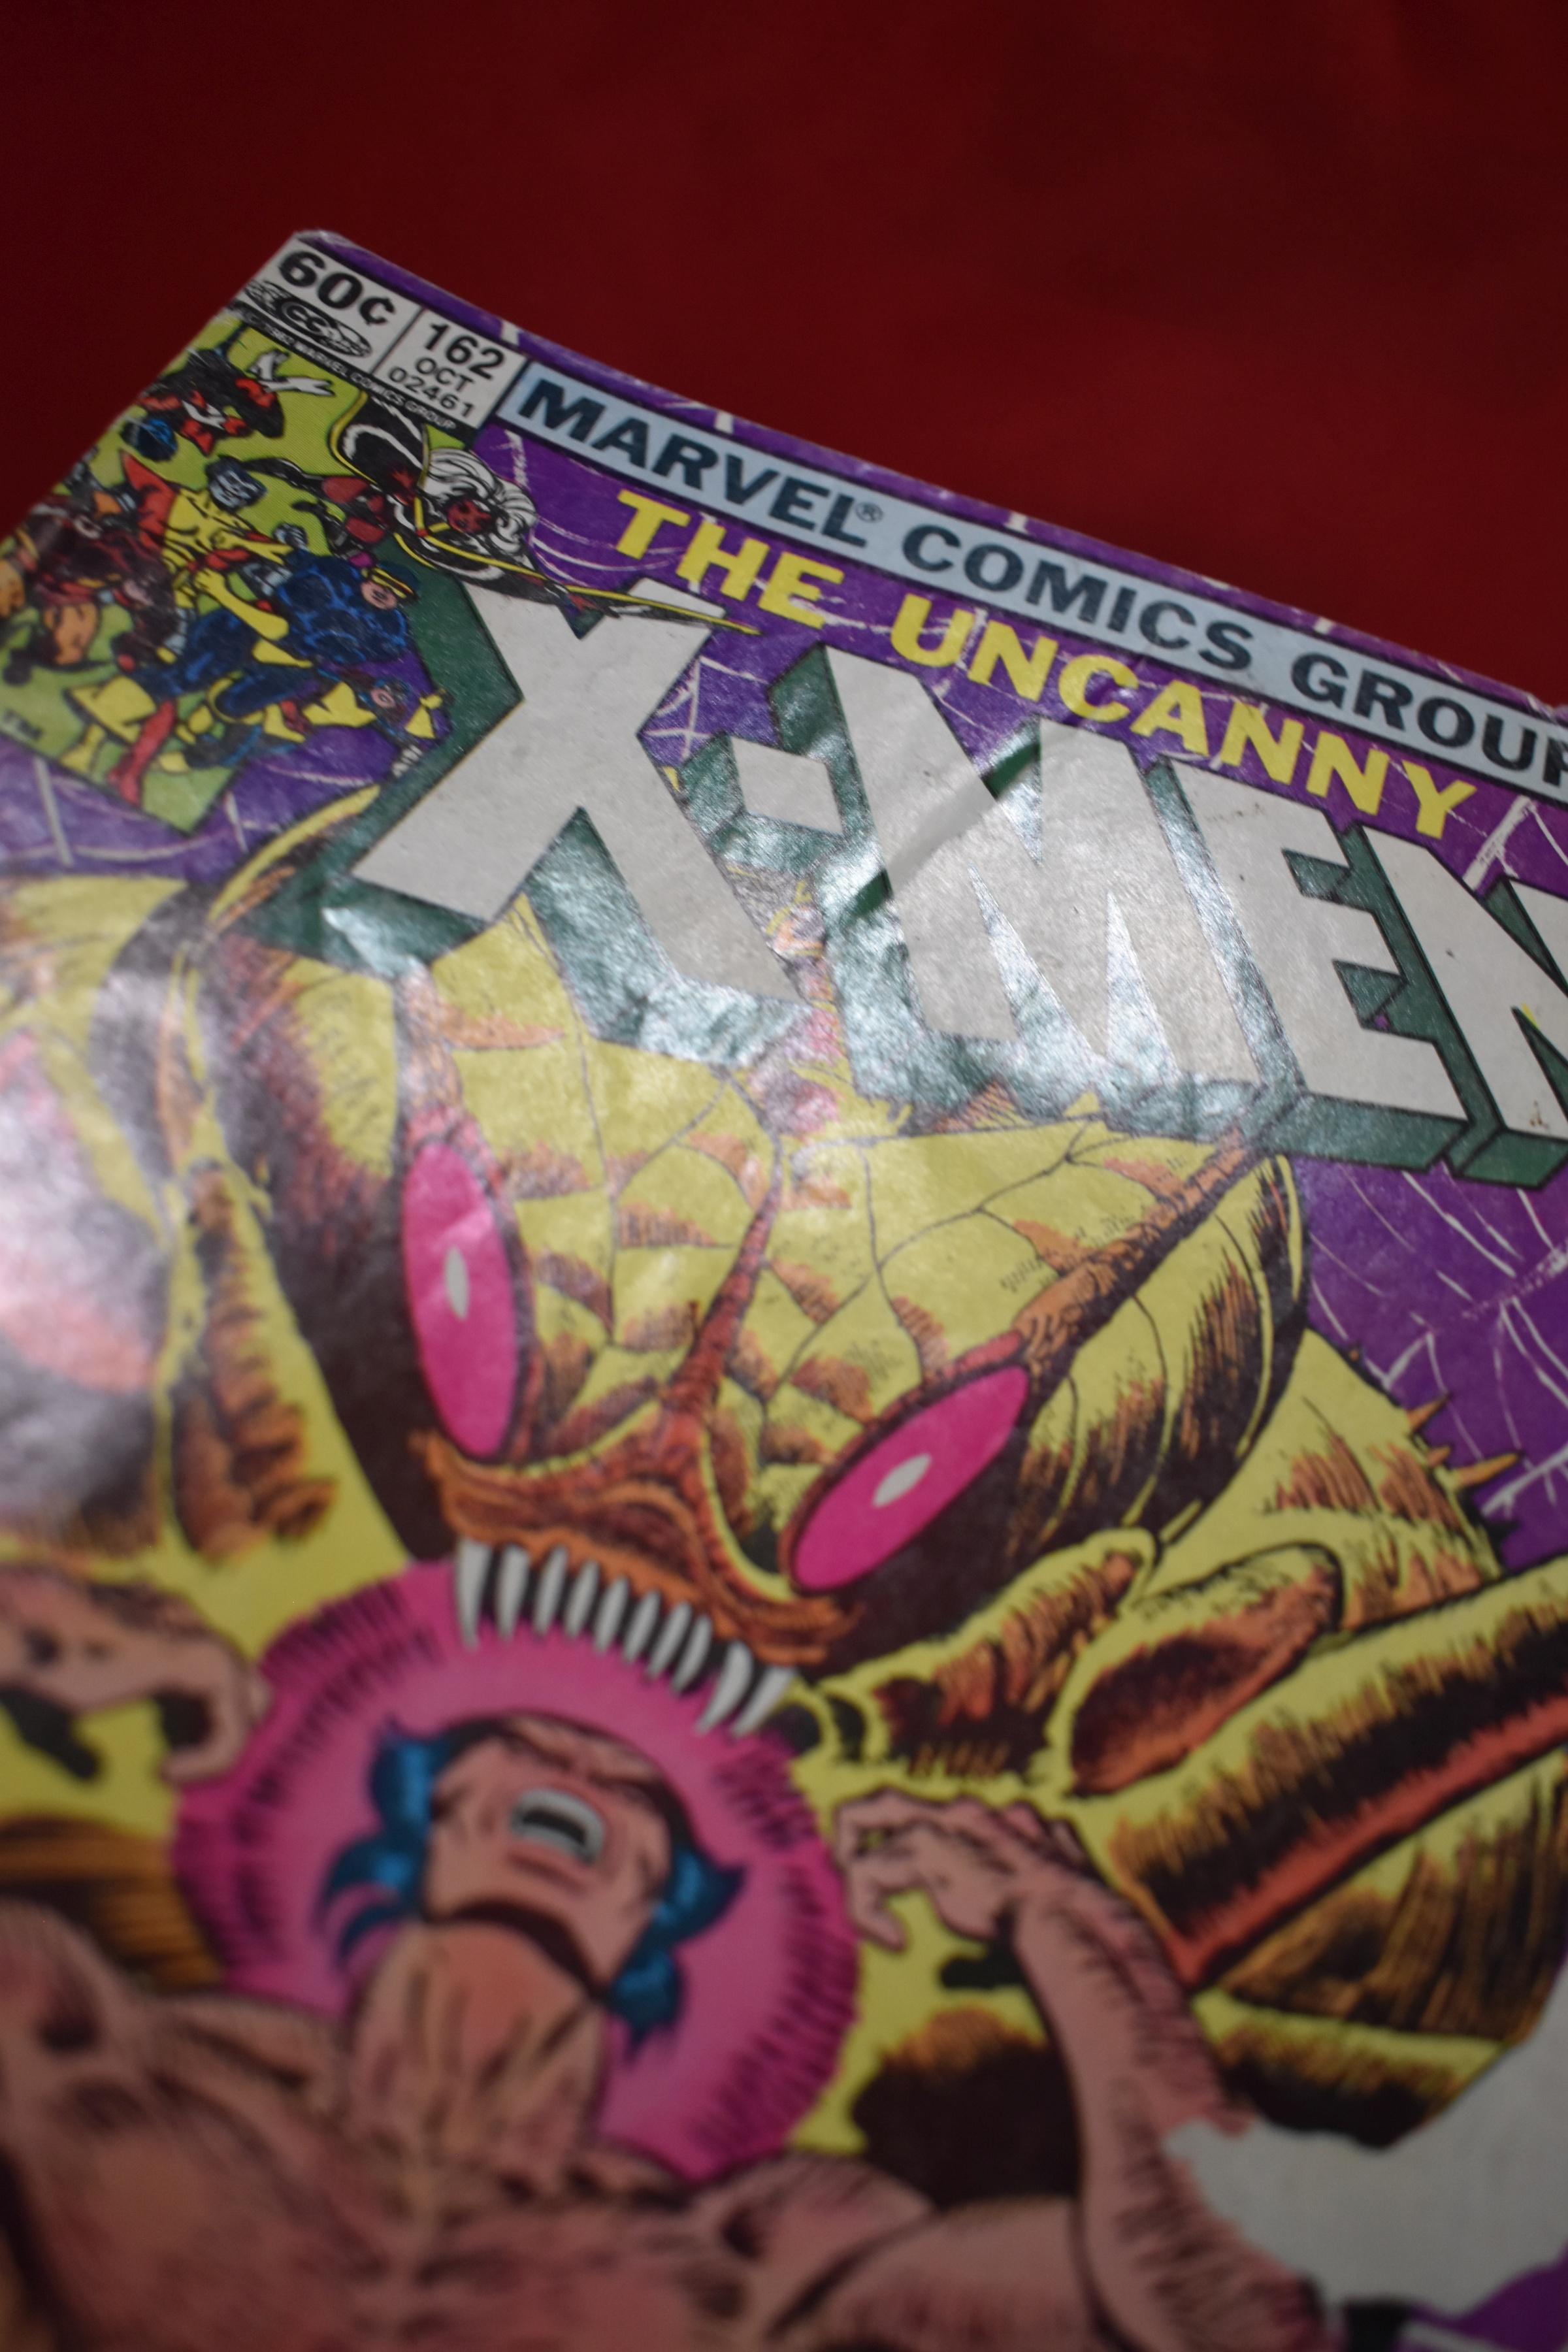 X-MEN #162 | SOLO WOLVERINE STORY - NEWSSTAND | *CREASING - SEE PICS*